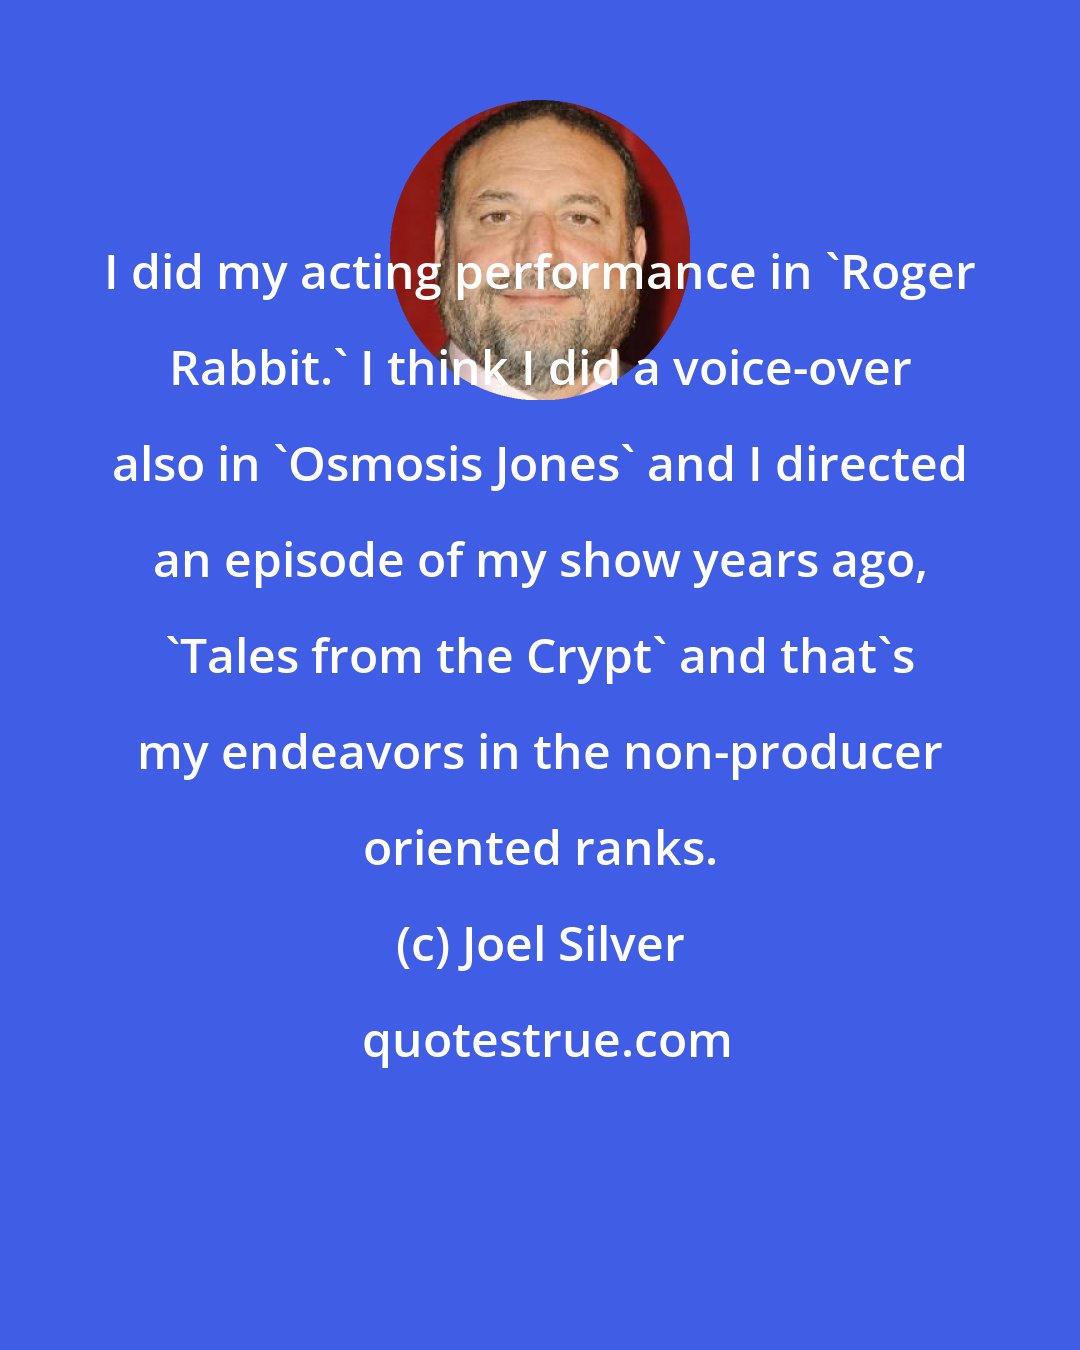 Joel Silver: I did my acting performance in 'Roger Rabbit.' I think I did a voice-over also in 'Osmosis Jones' and I directed an episode of my show years ago, 'Tales from the Crypt' and that's my endeavors in the non-producer oriented ranks.